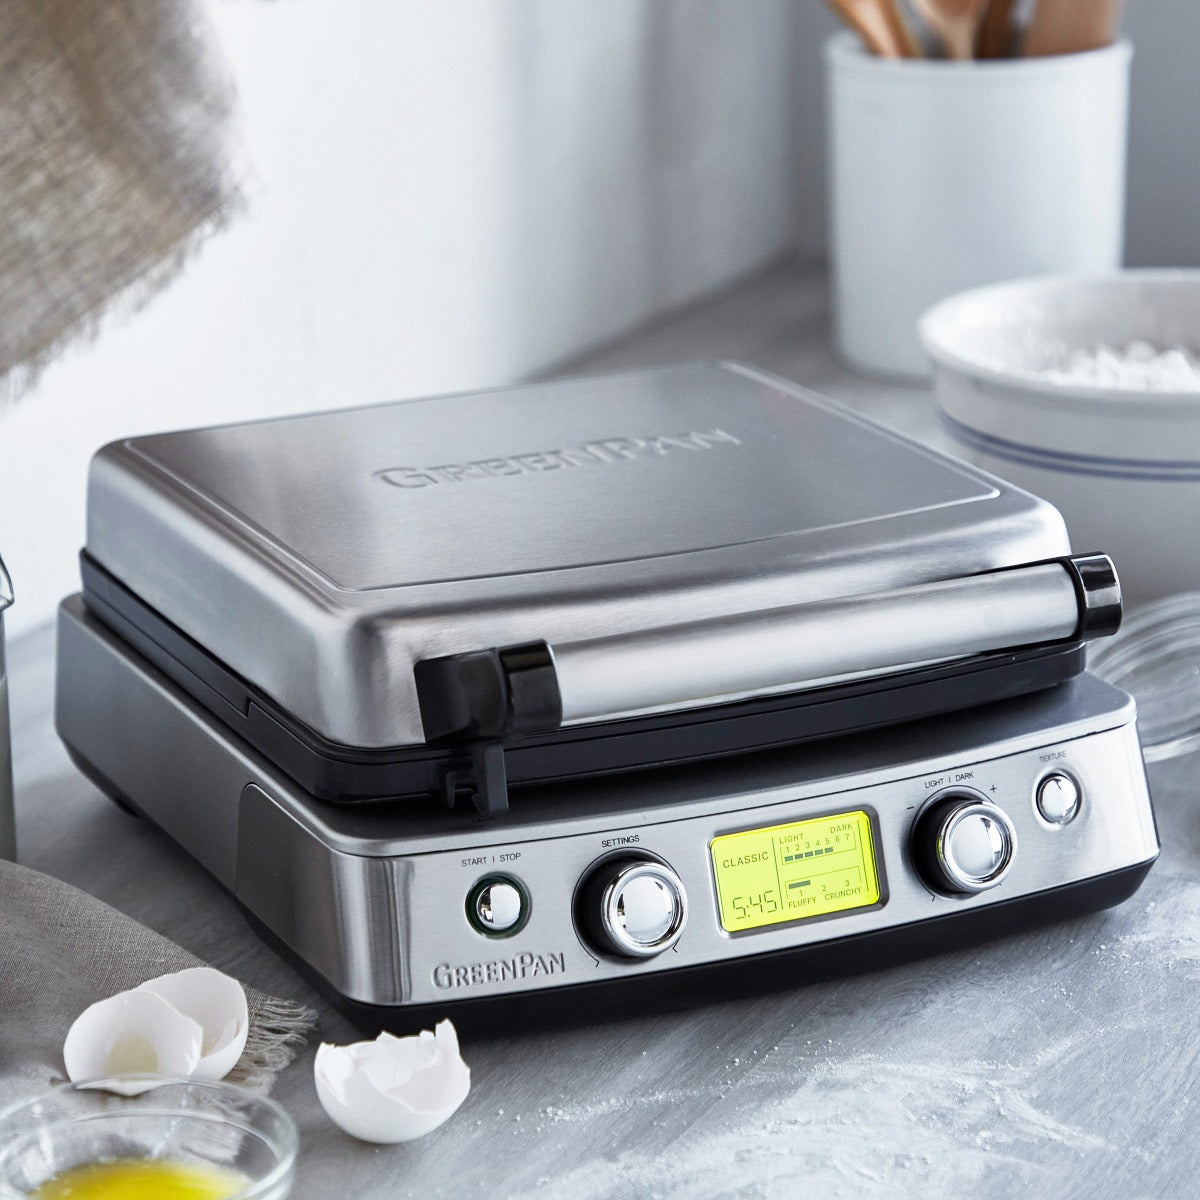 Elite Ceramic Nonstick Waffle Maker from GreenPan placed on a kitchen countertop with eggs and flour nearby